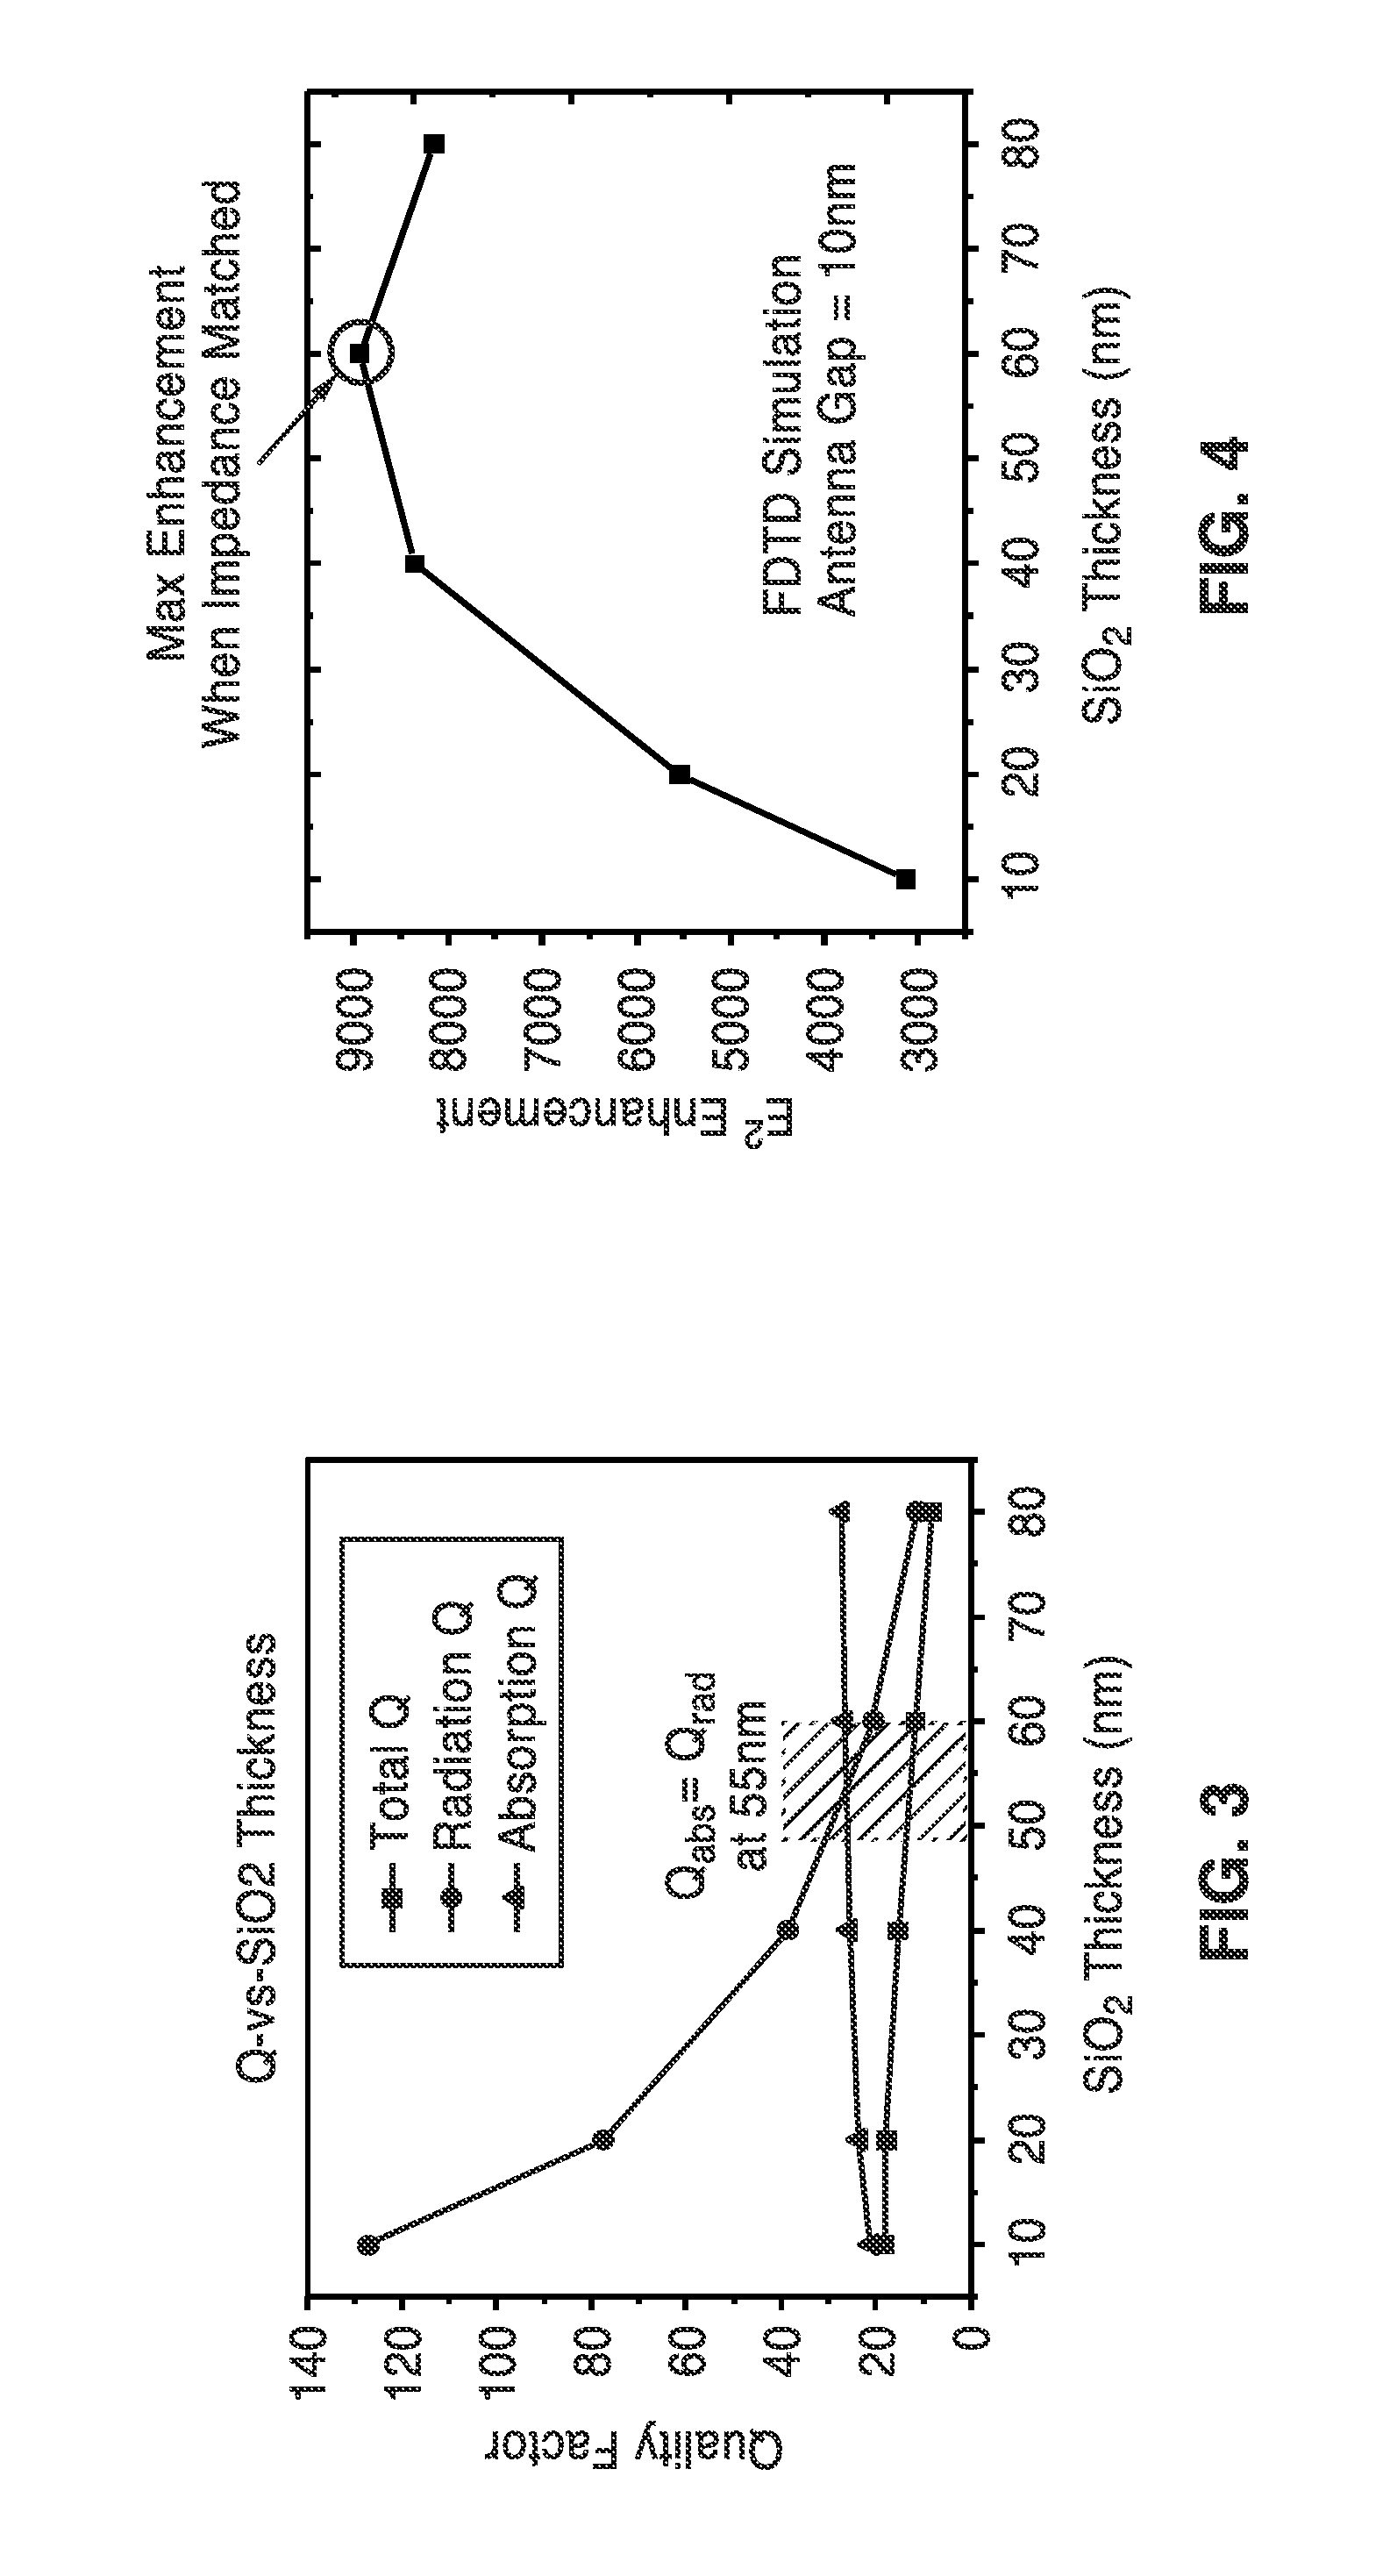 Impedance matching ground plane for high efficiency coupling with optical antennas